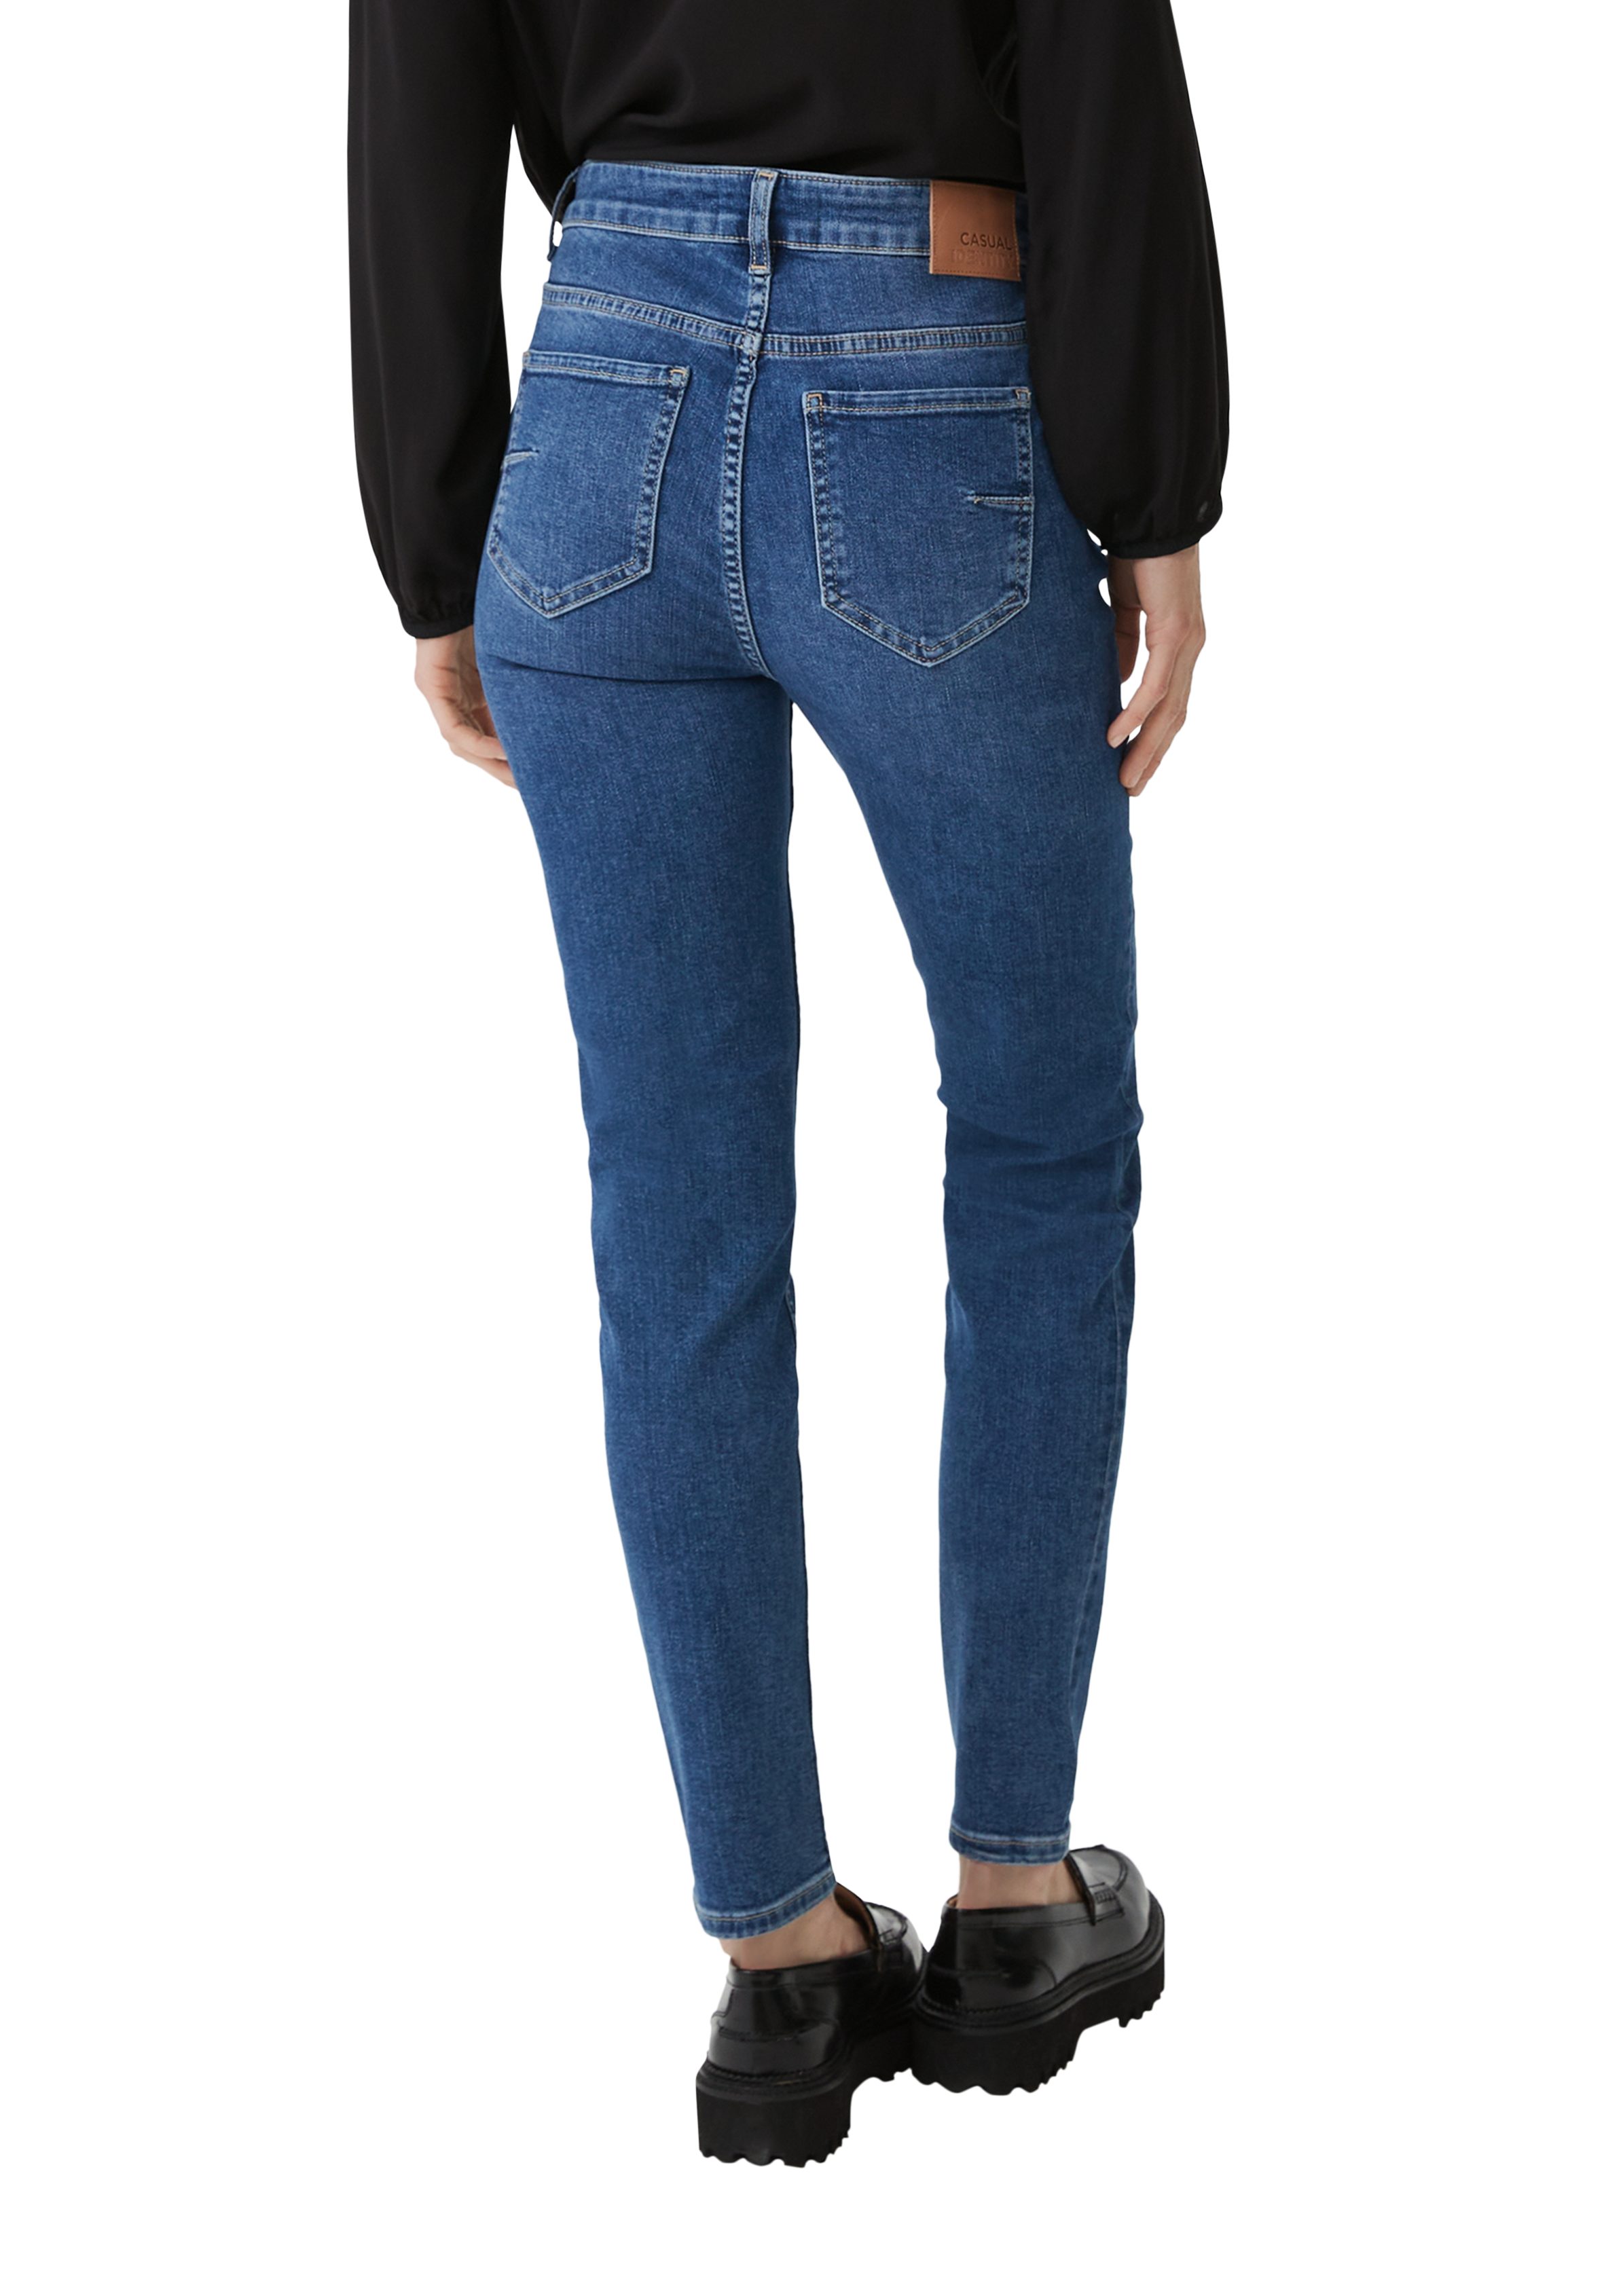 casual comma Waschung, mit Skinny: 5-Pocket-Jeans Waschung Leder-Patch identity Jeans